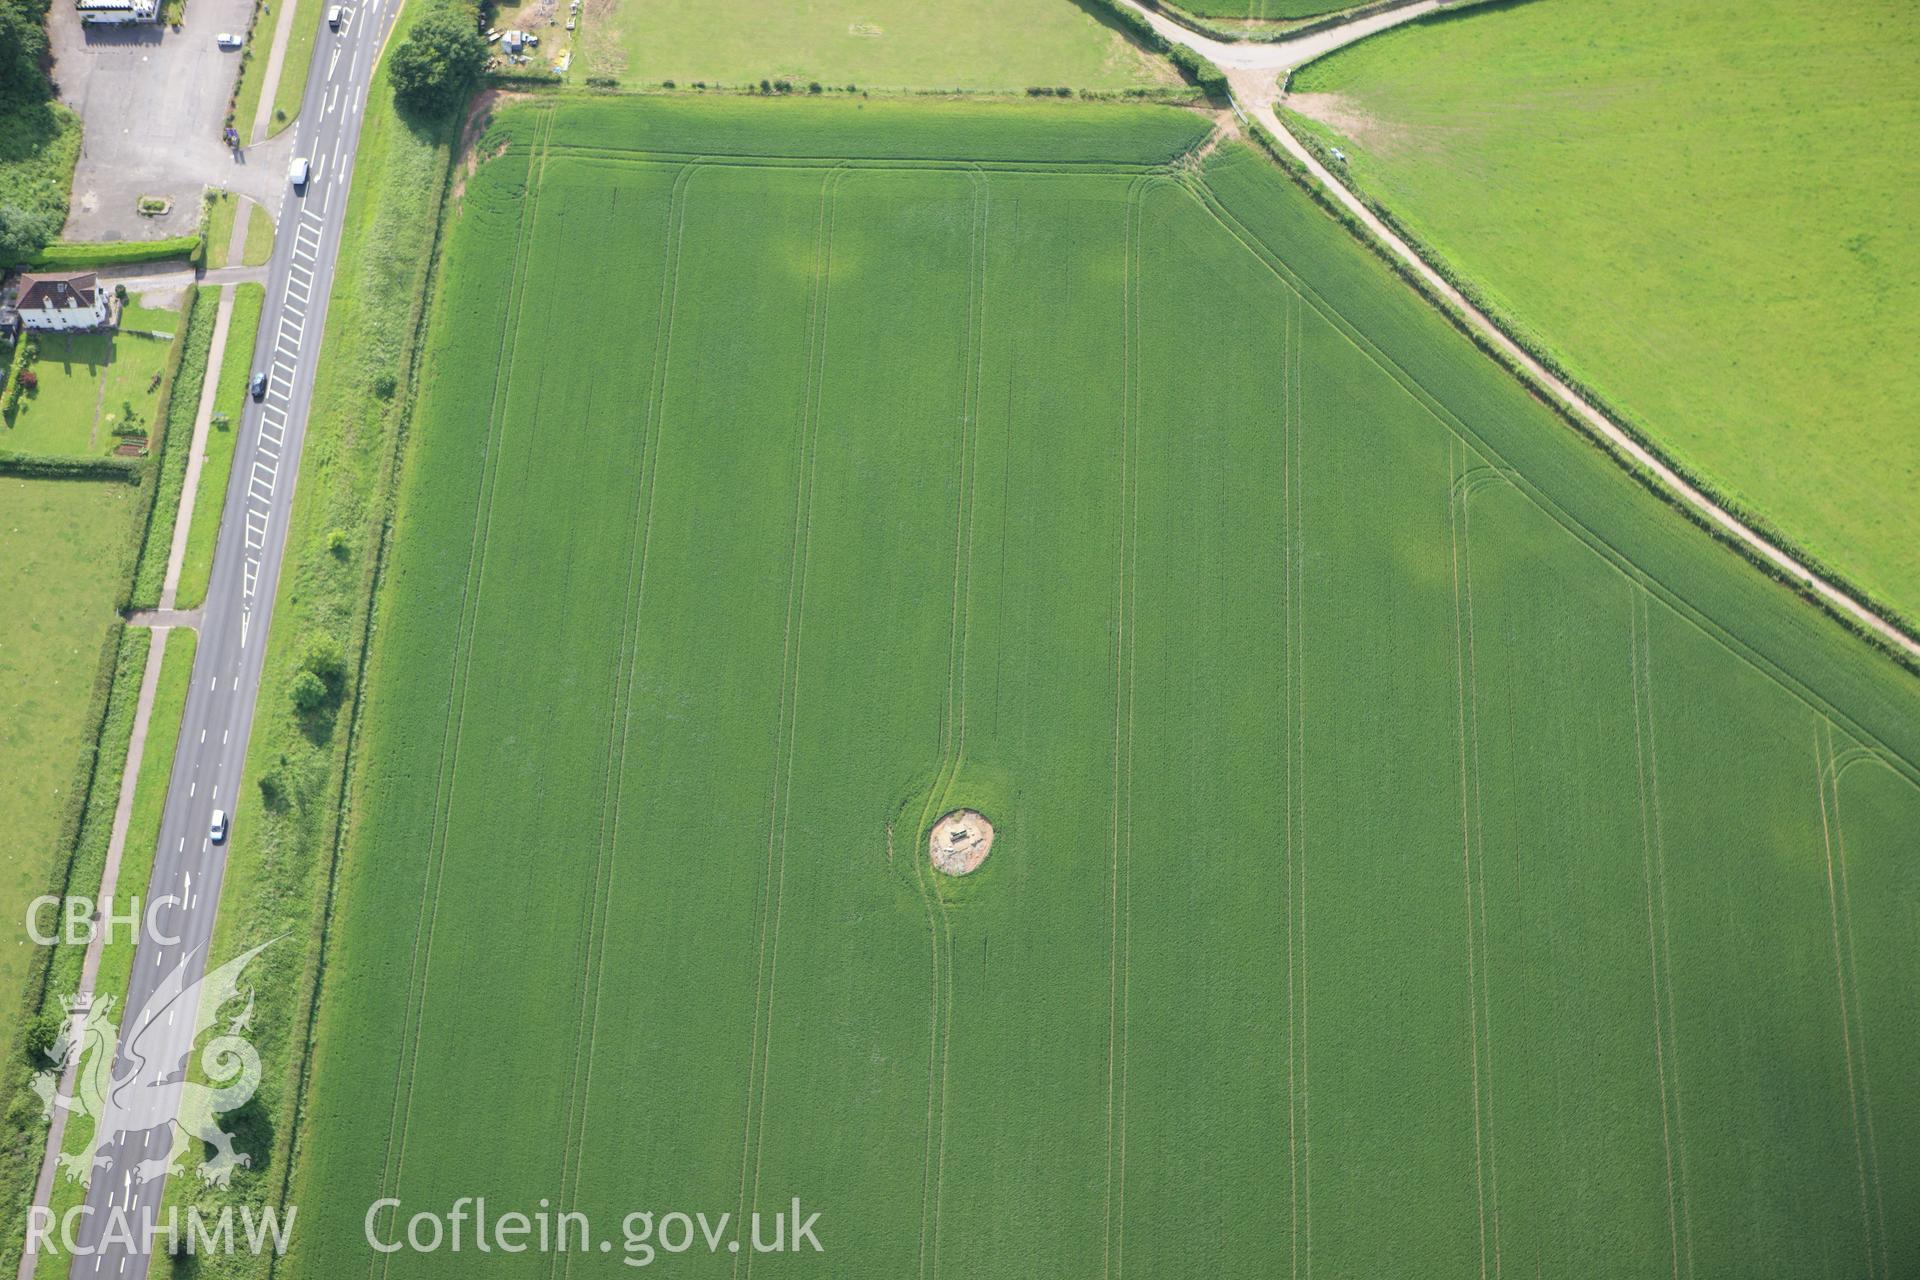 RCAHMW colour oblique aerial photograph of Five Lanes Round Barrow A. Taken on 11 June 2009 by Toby Driver